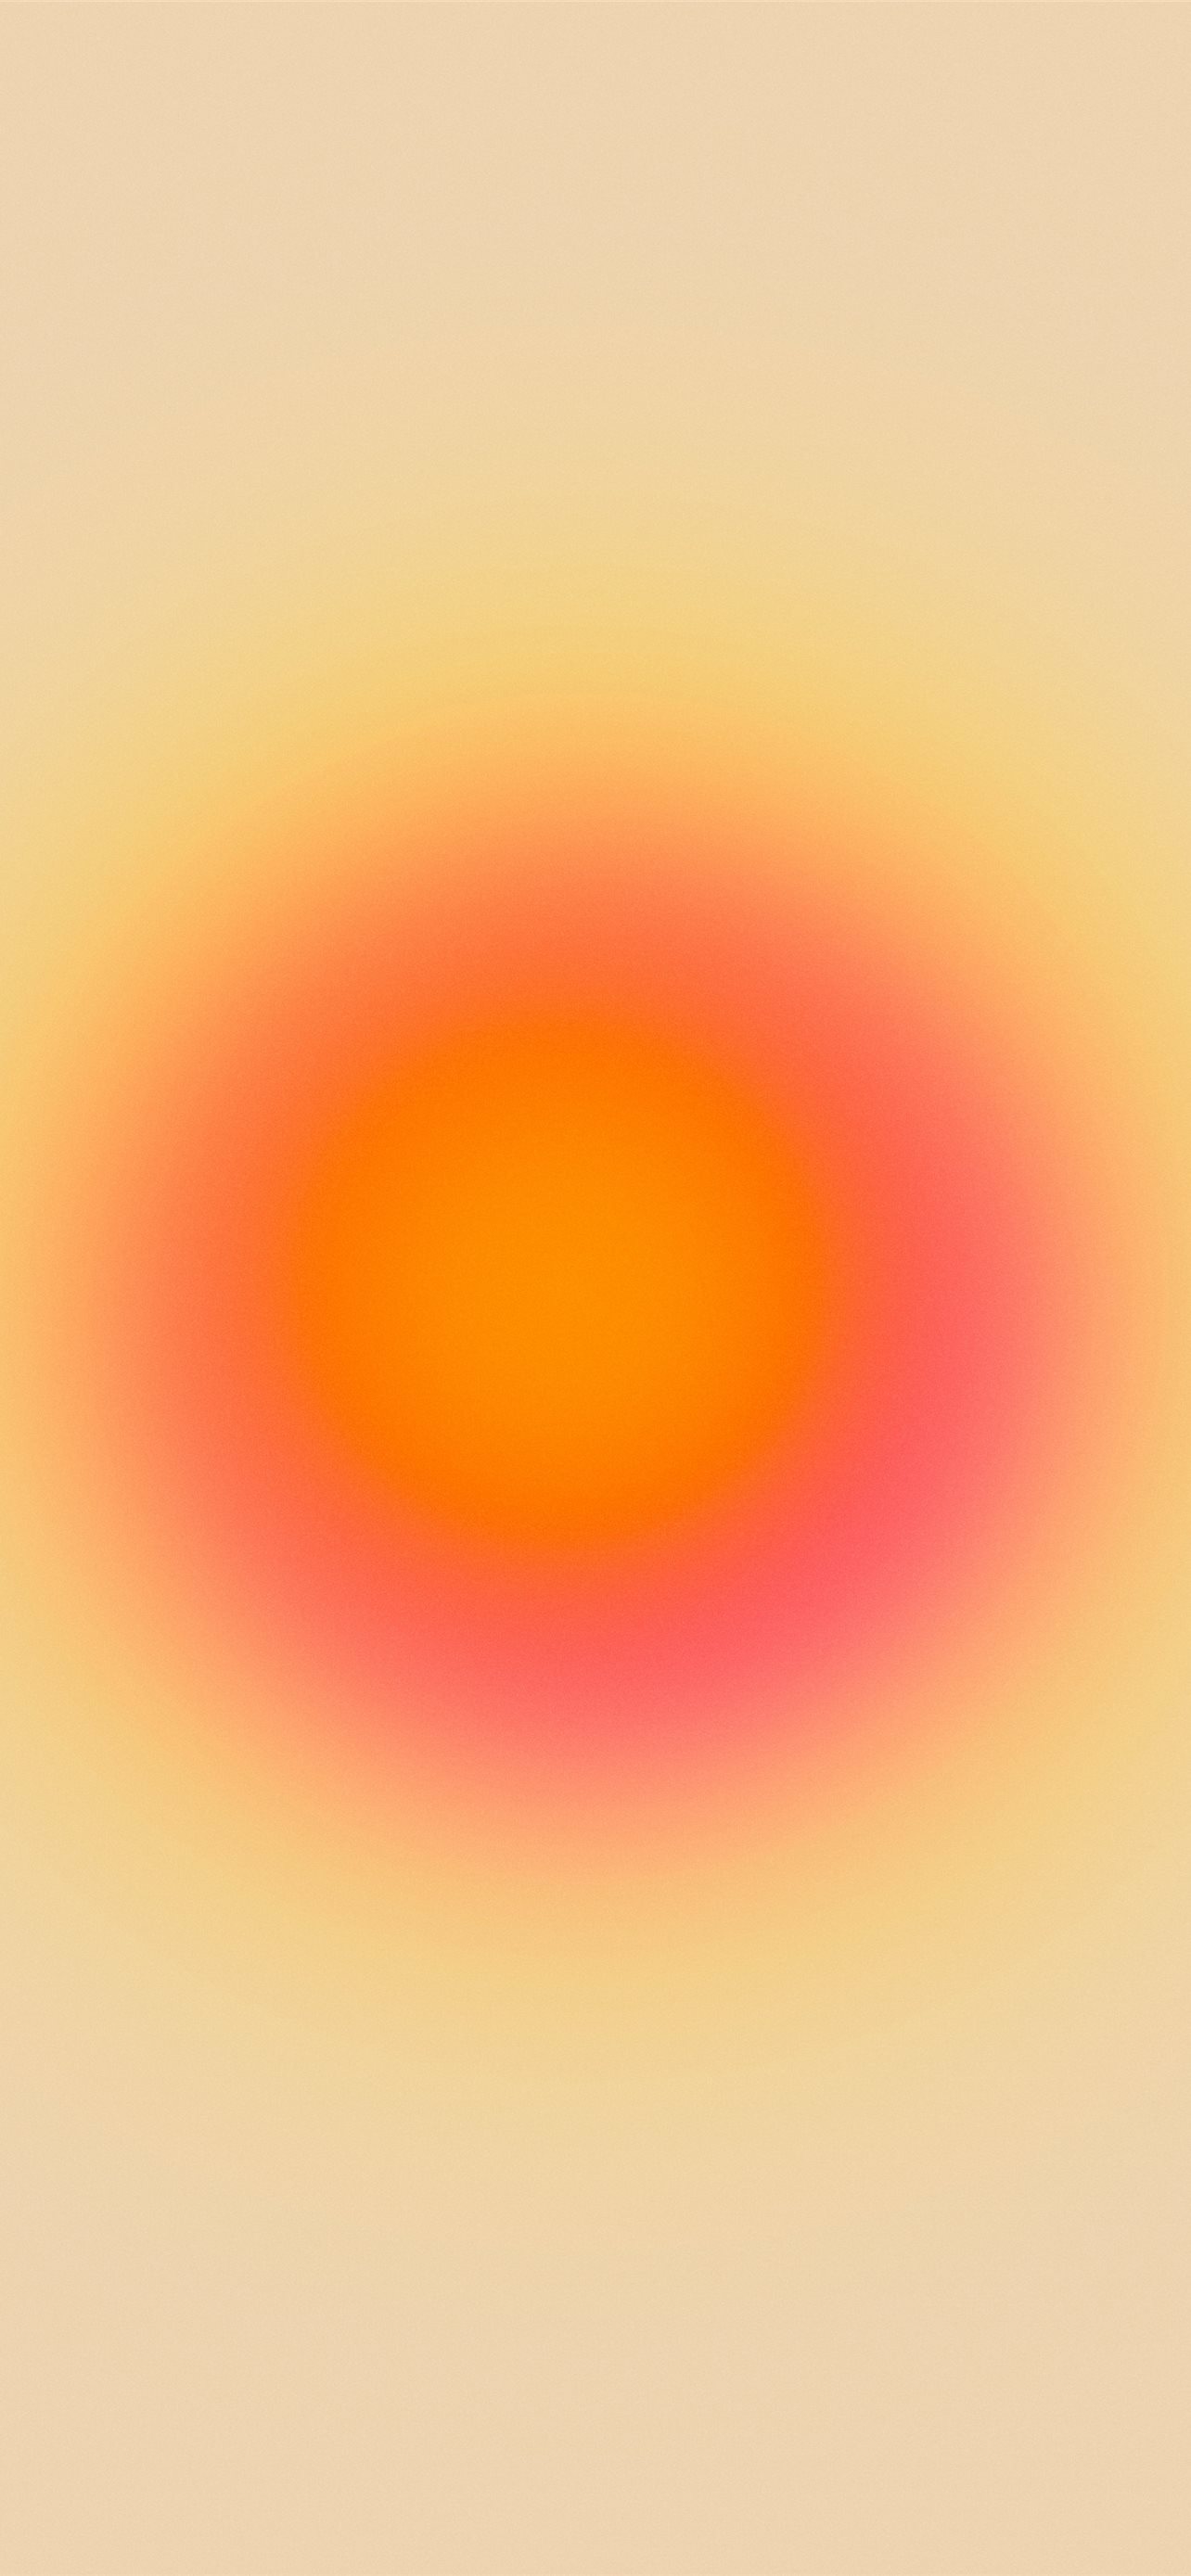 yellow and orange sun illustration iPhone Wallpapers Free Download